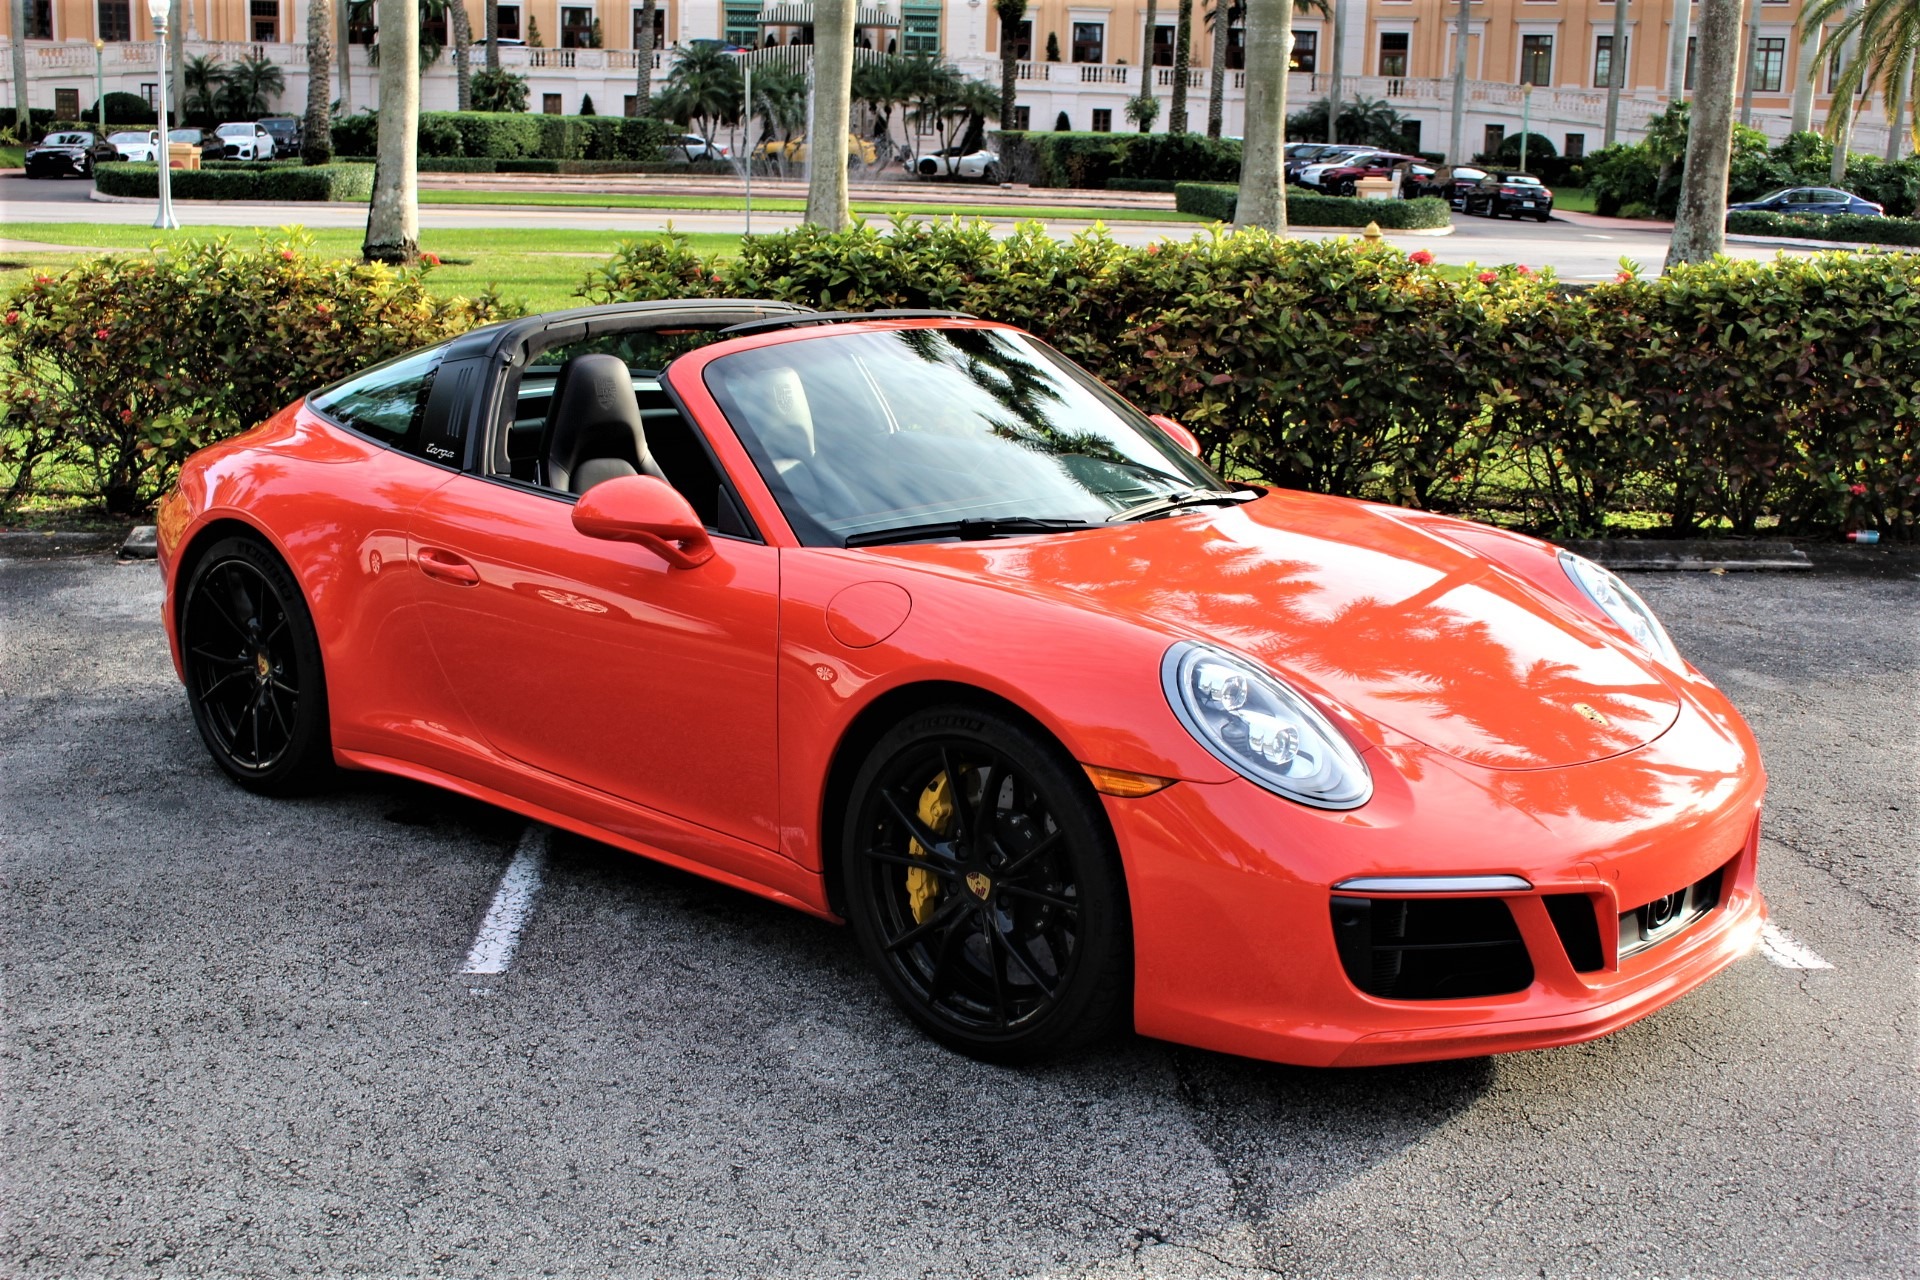 Used 2018 Porsche 911 Targa 4S for sale Sold at The Gables Sports Cars in Miami FL 33146 4